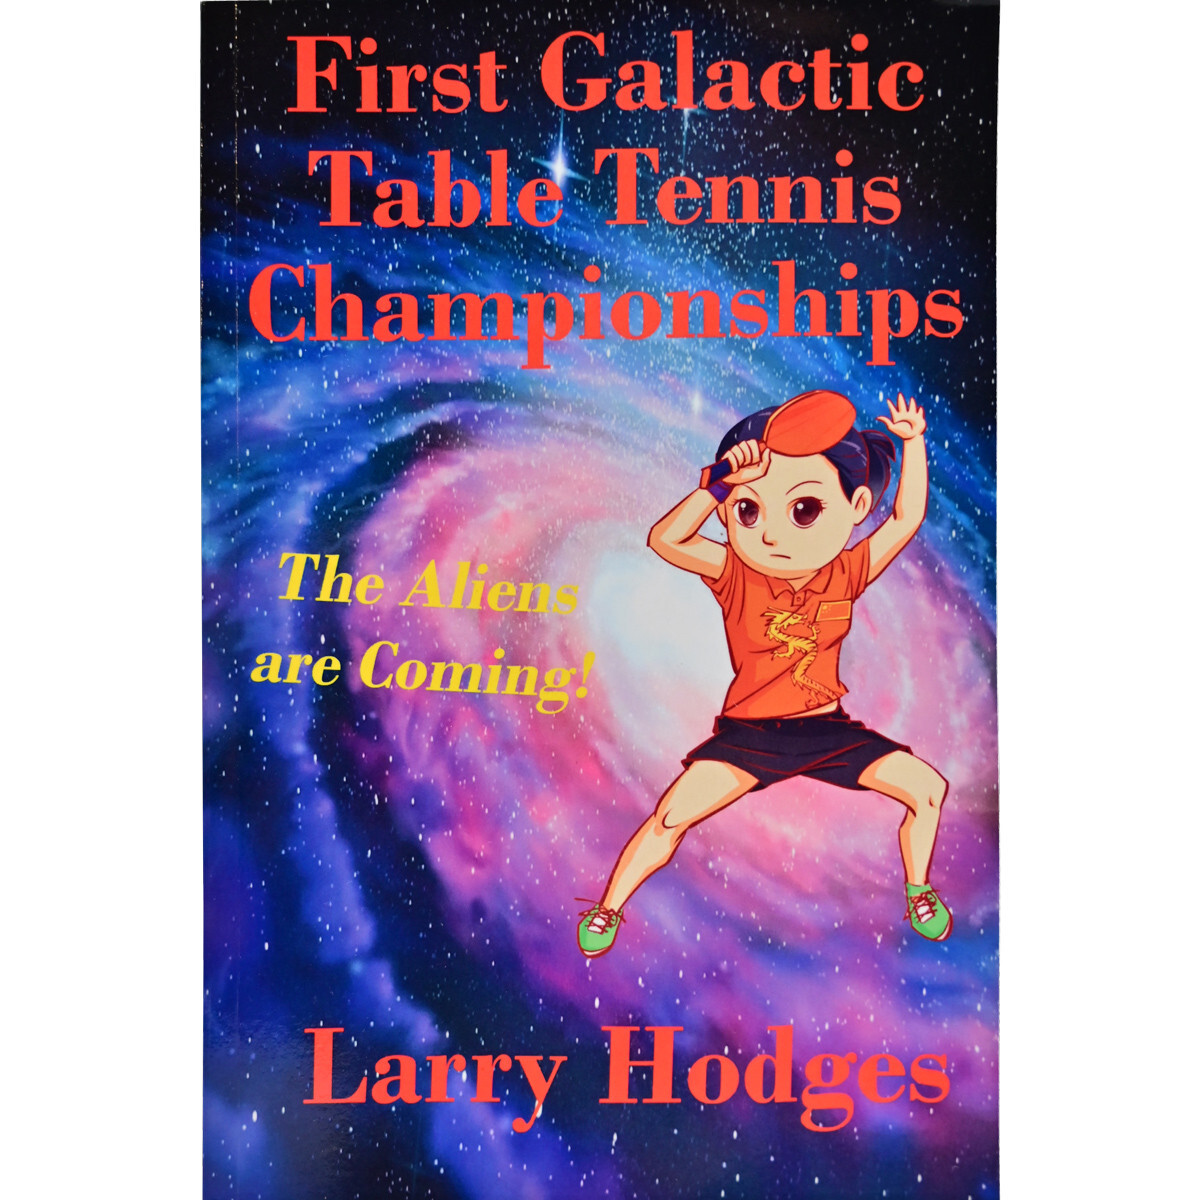 First Galactic Table Tennis Championships by Larry Hodges